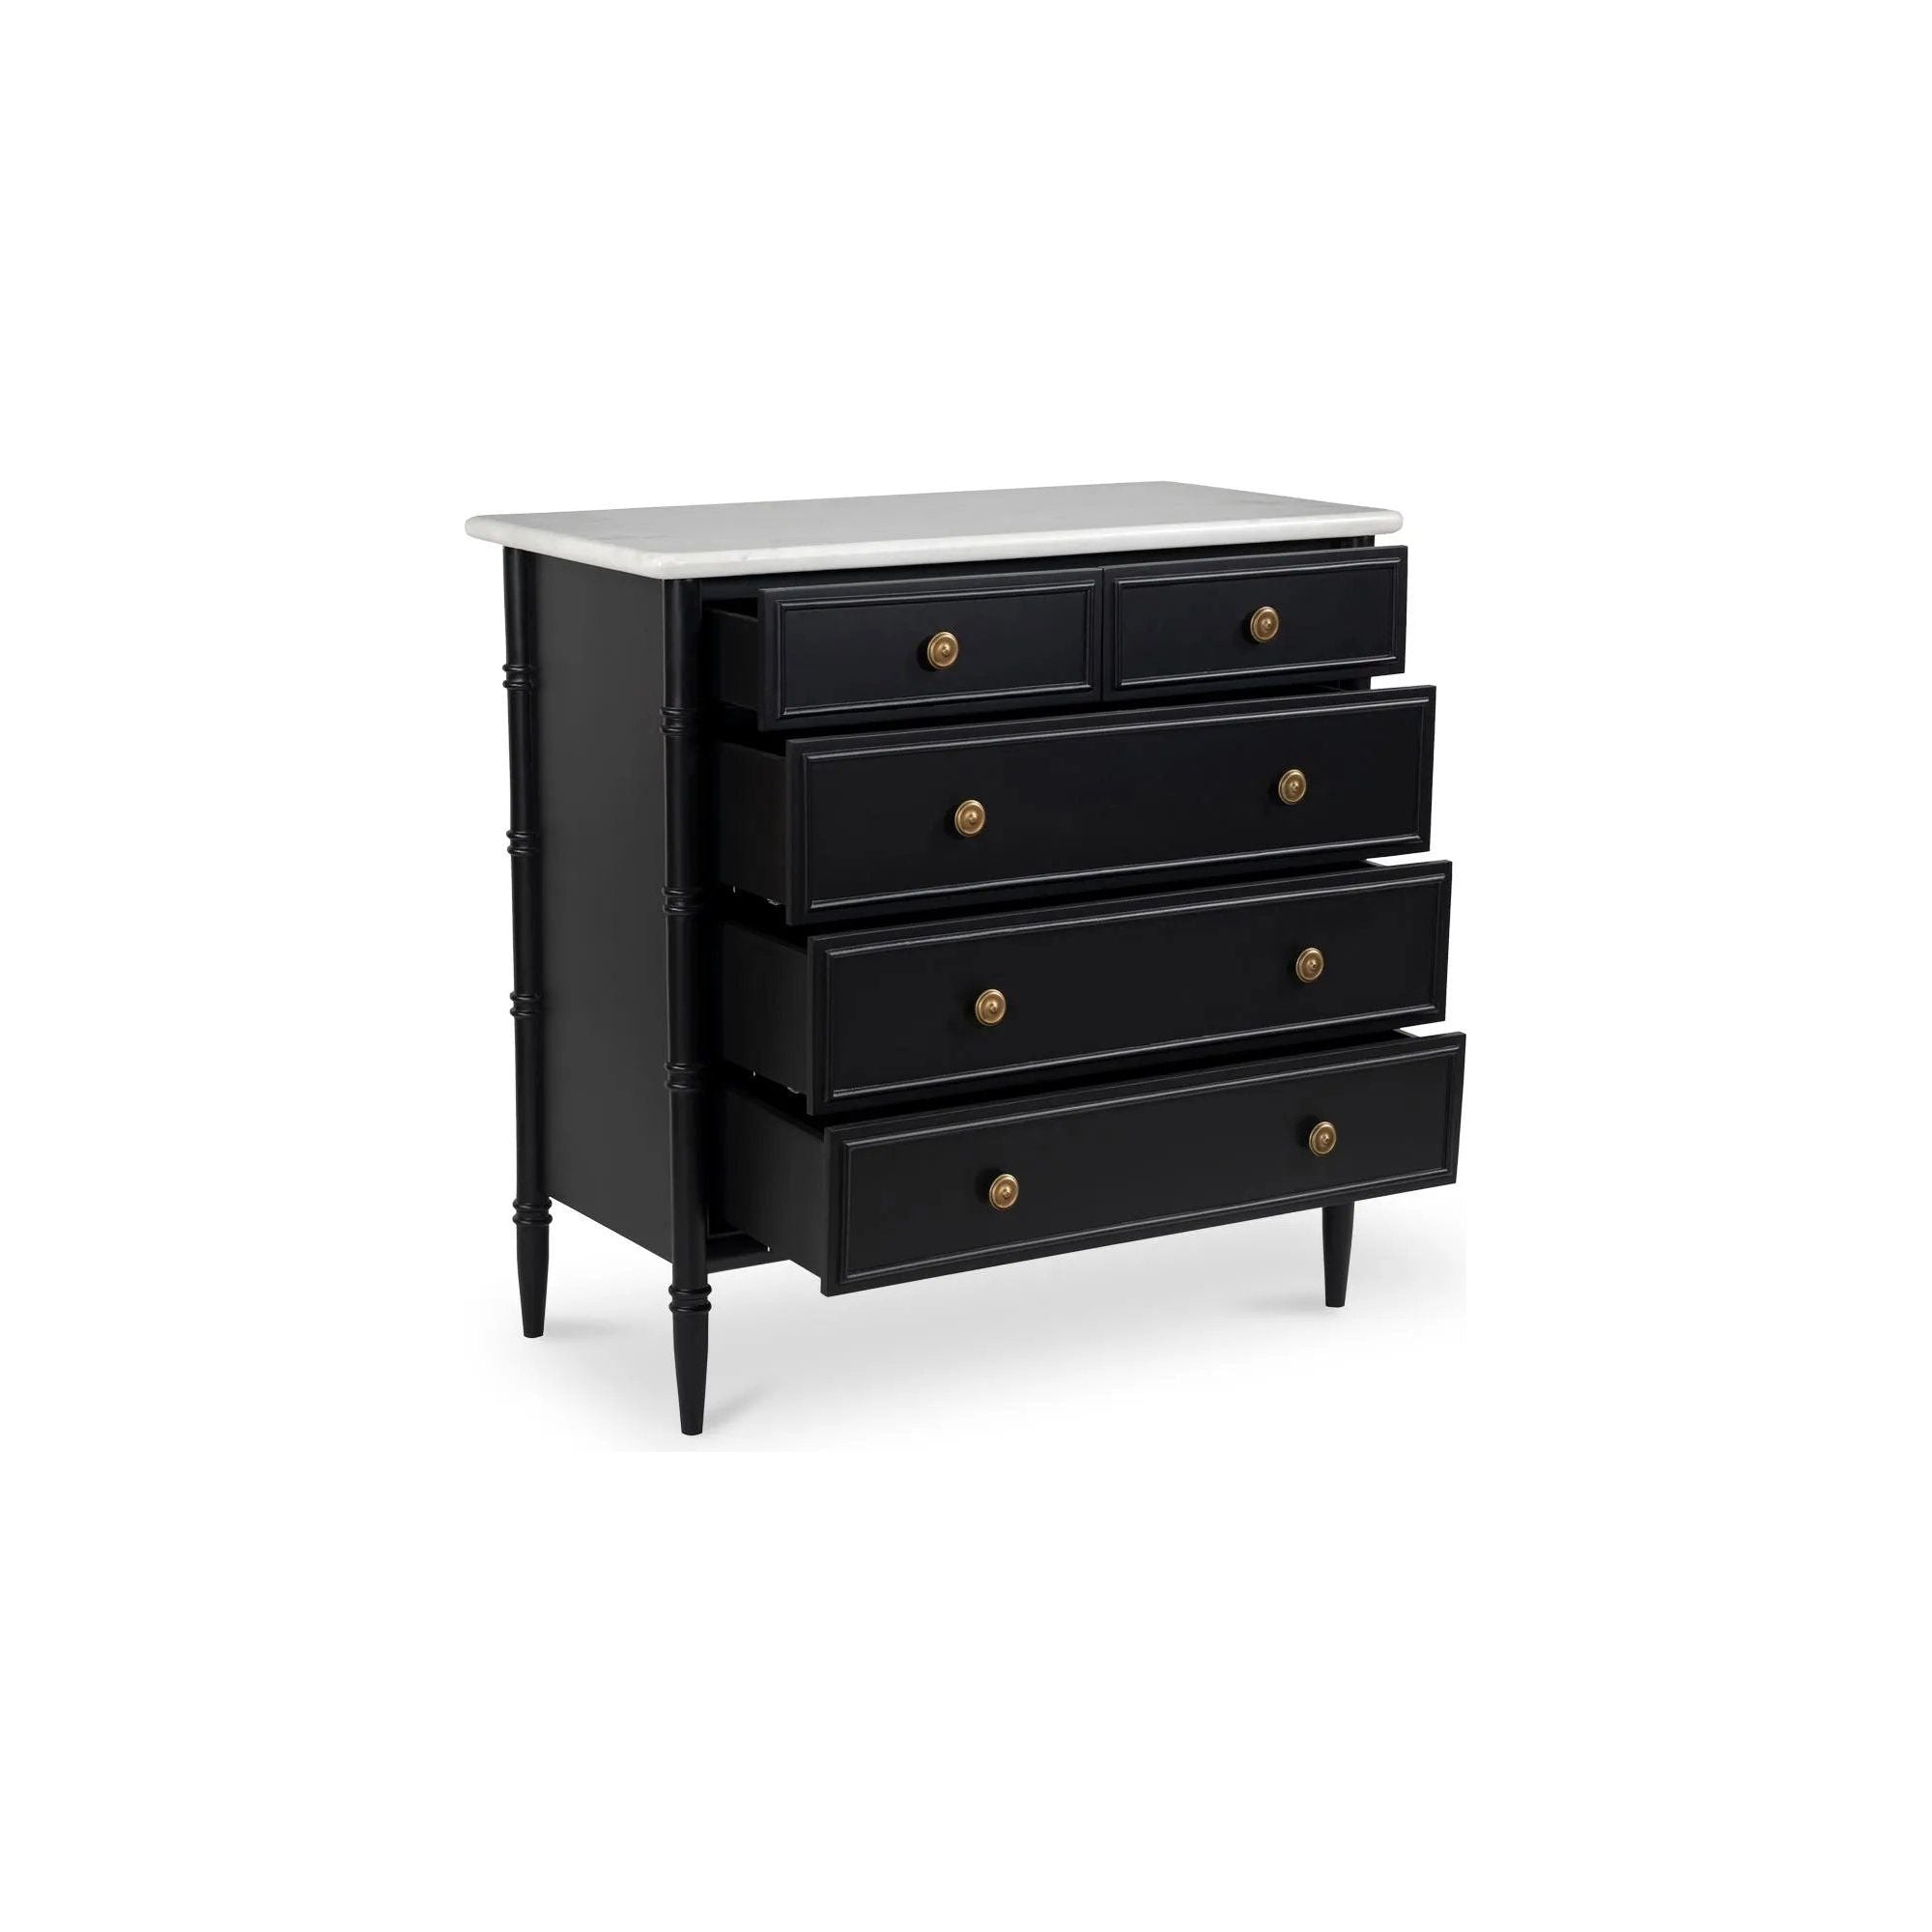 Inspired by the everyday grace of Provence style, the Eleanor 5-drawer chest showcases a classically graceful profile with distinctive turned details. Amethyst Home provides interior design, new home construction design consulting, vintage area rugs, and lighting in the Houston metro area.